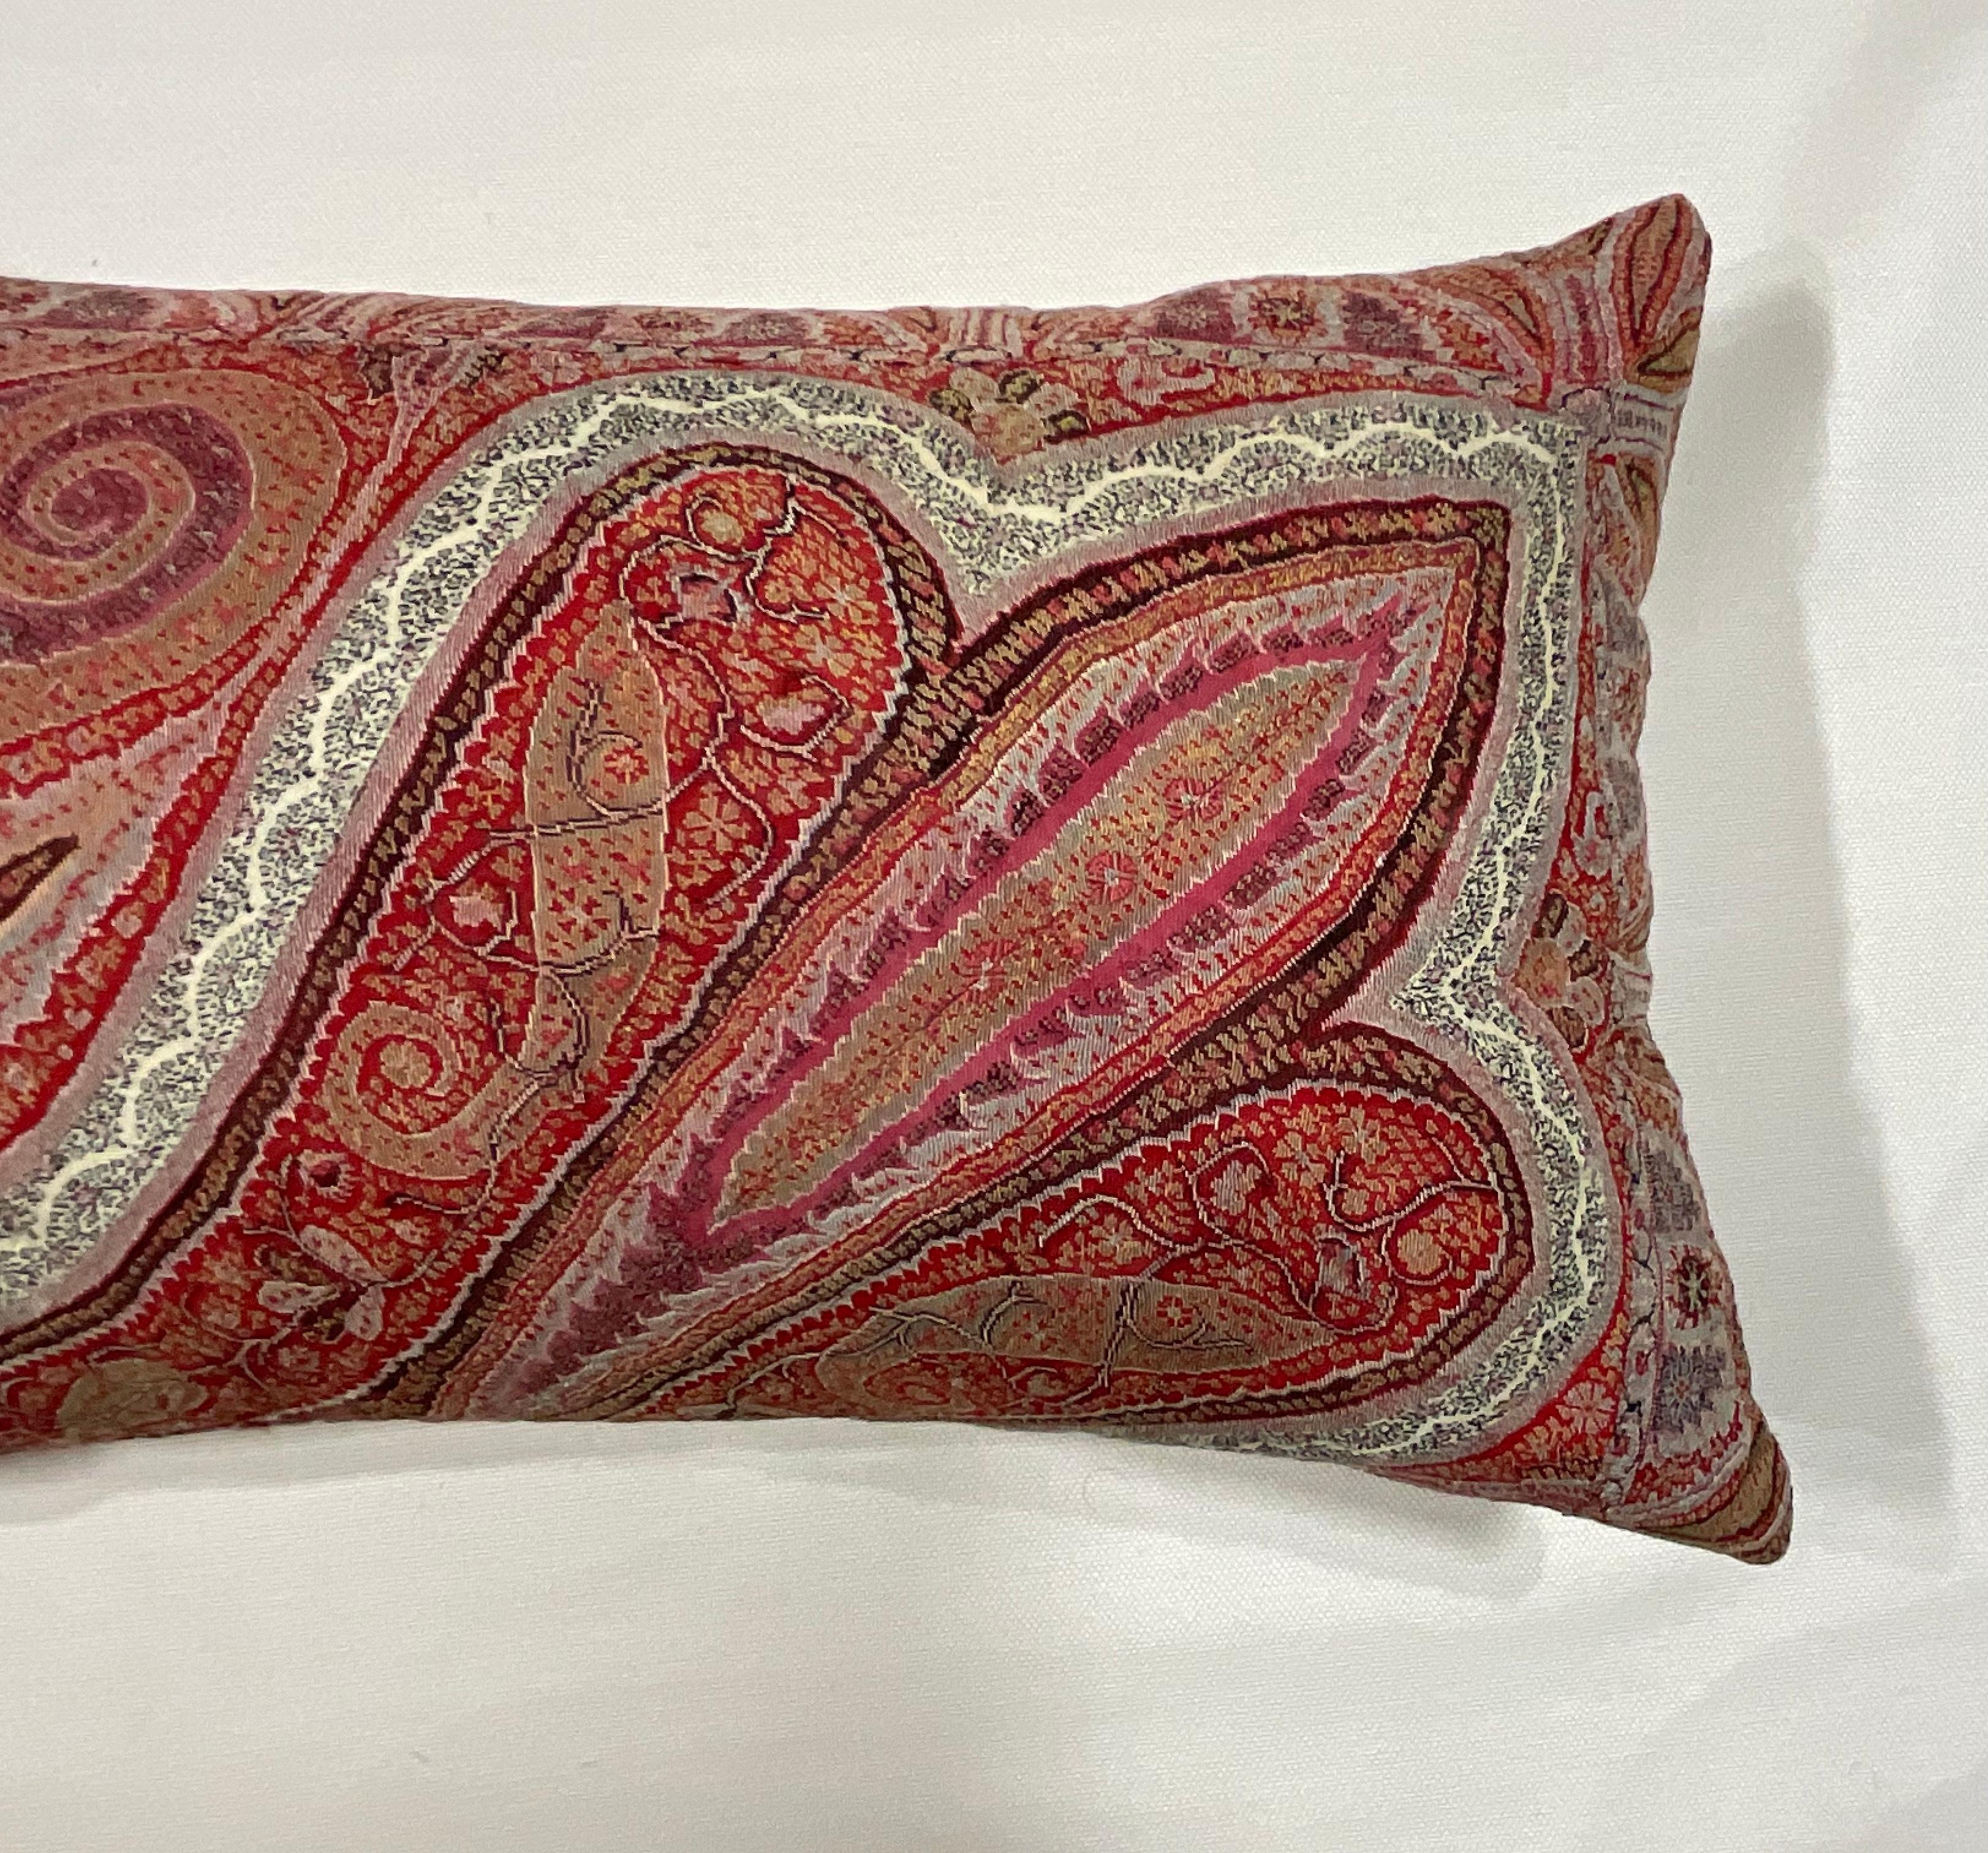 Beautiful pillow made of antique Indian handmade Paisley Textile, fresh insert, fine cotton backing.
 